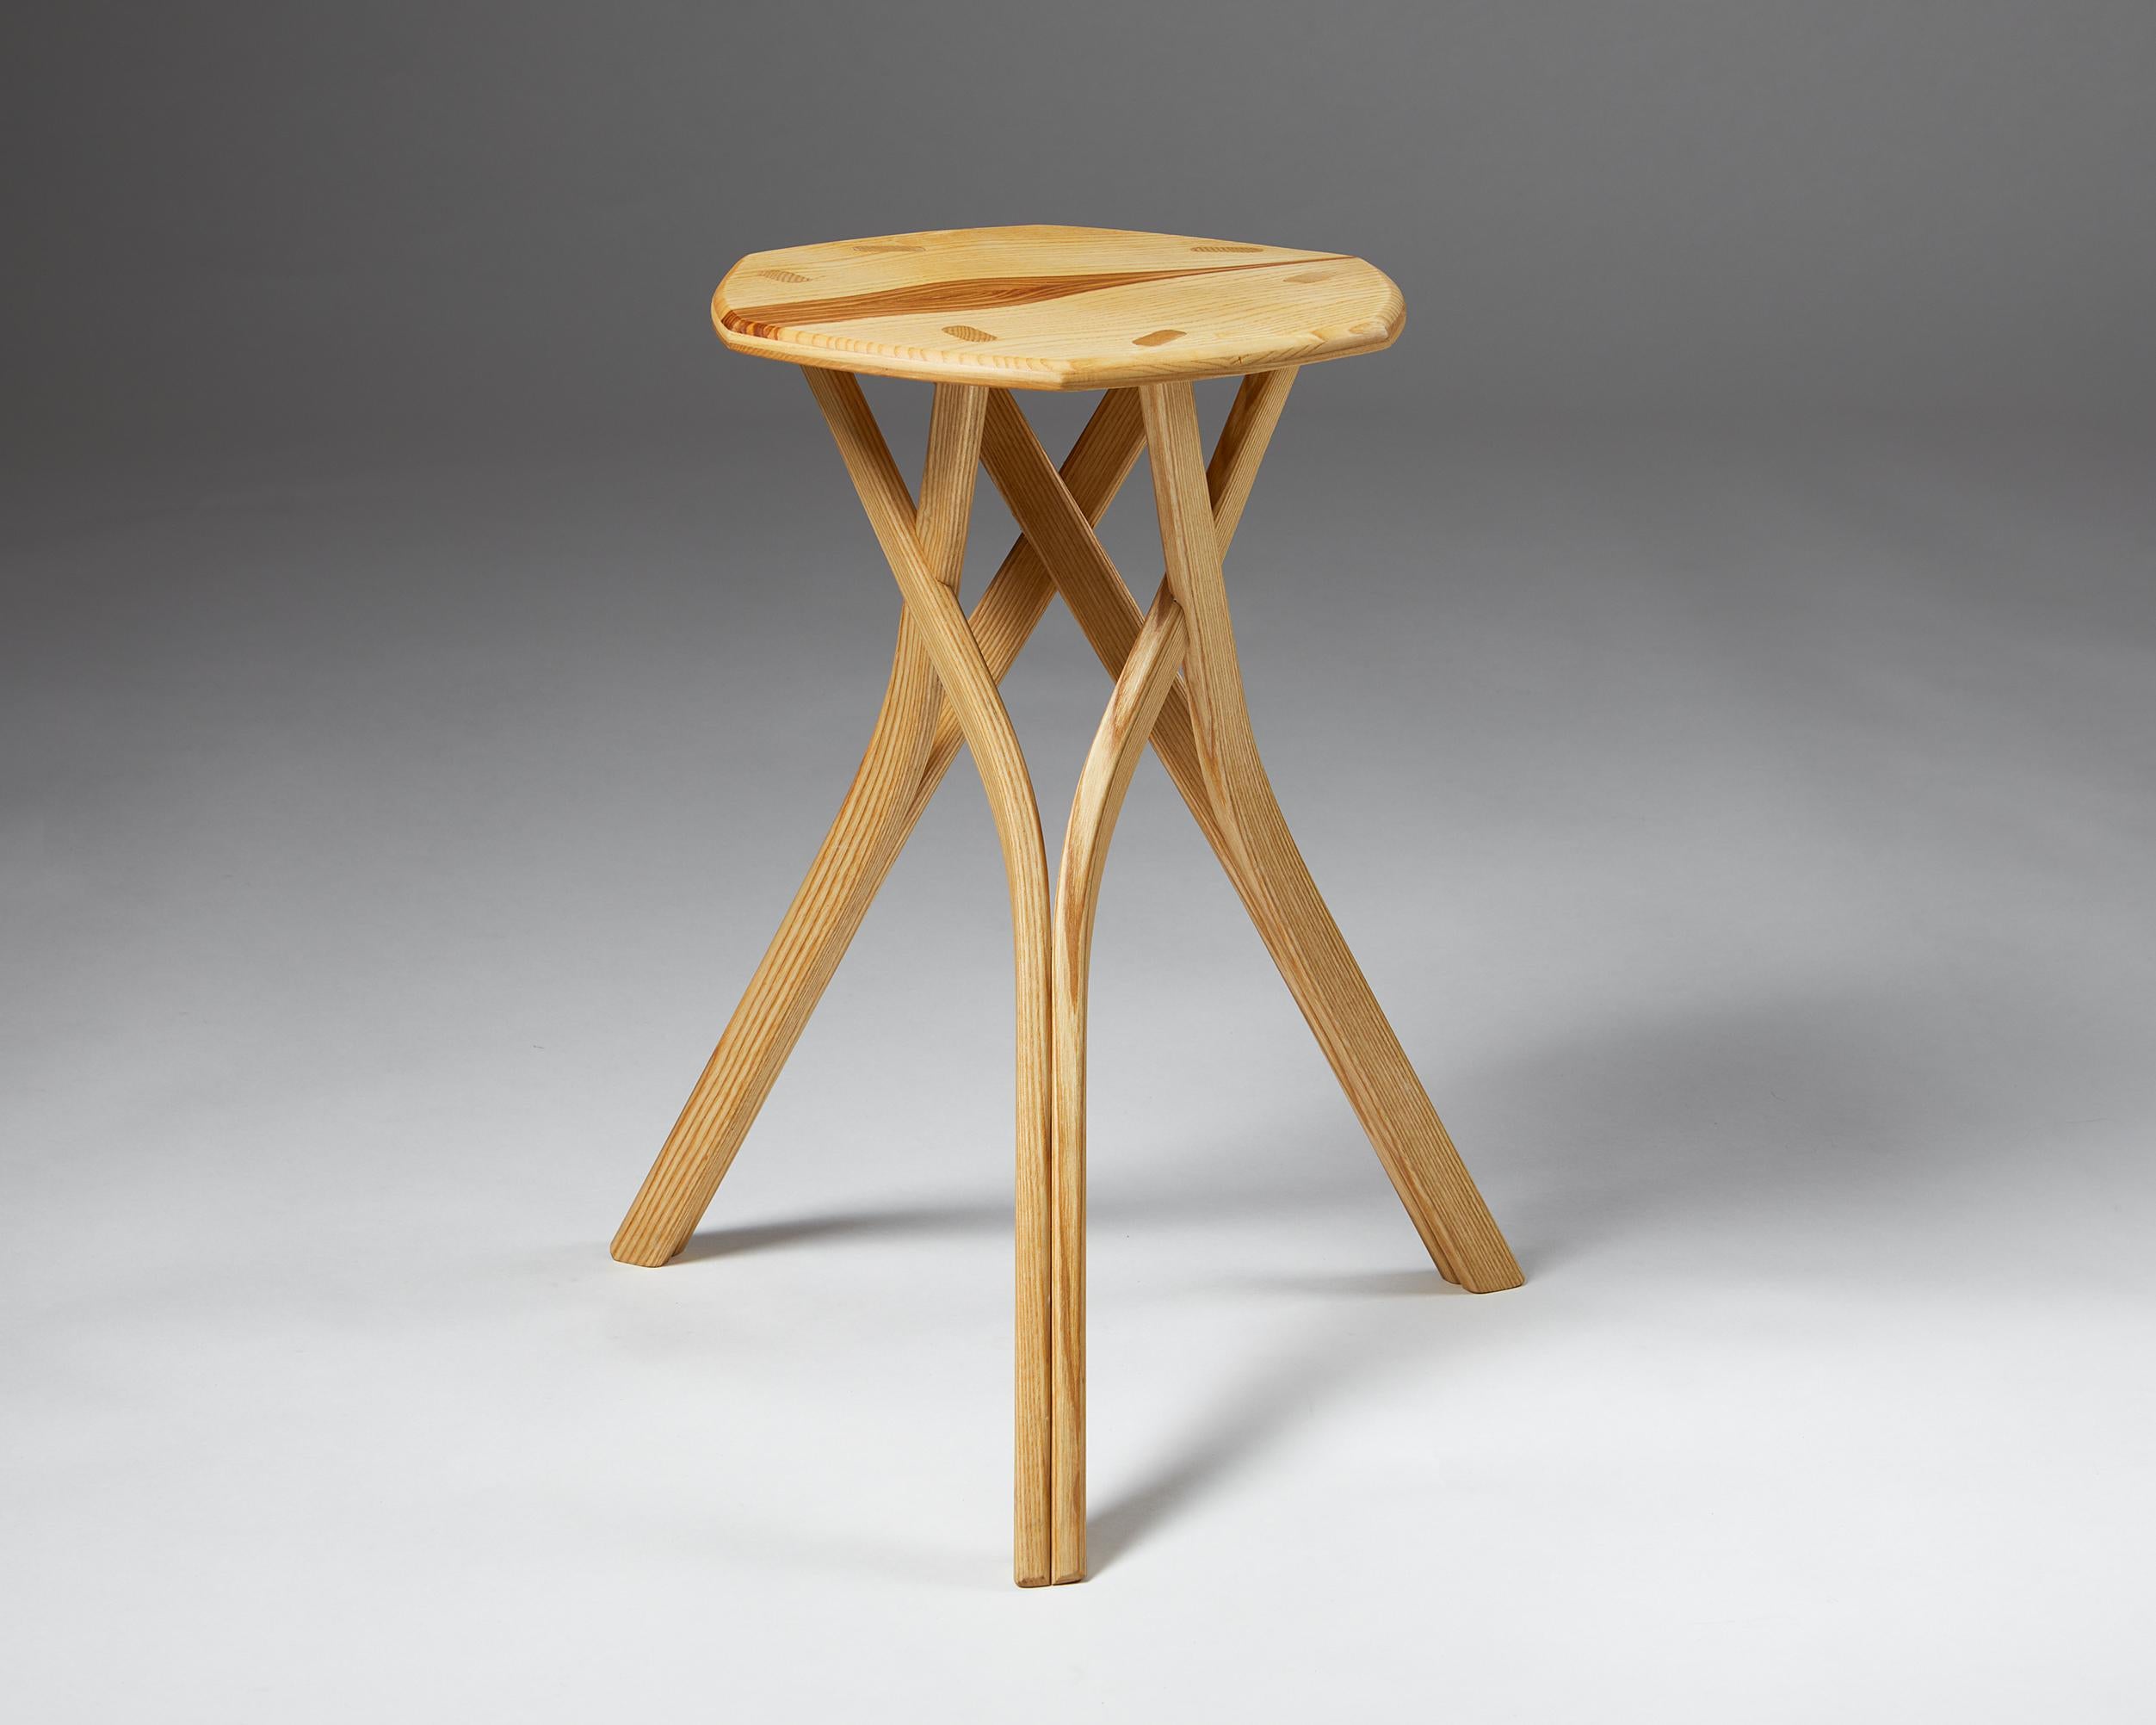 Stool designed by Calle Warfvinge,
Sweden. Contemporary.

Ash.

Unique.

This contemporary Swedish stool is a work of unparalleled craftsmanship. Calle Warfvinge carefully chose the individual wooden components to achieve a decorative effect. The